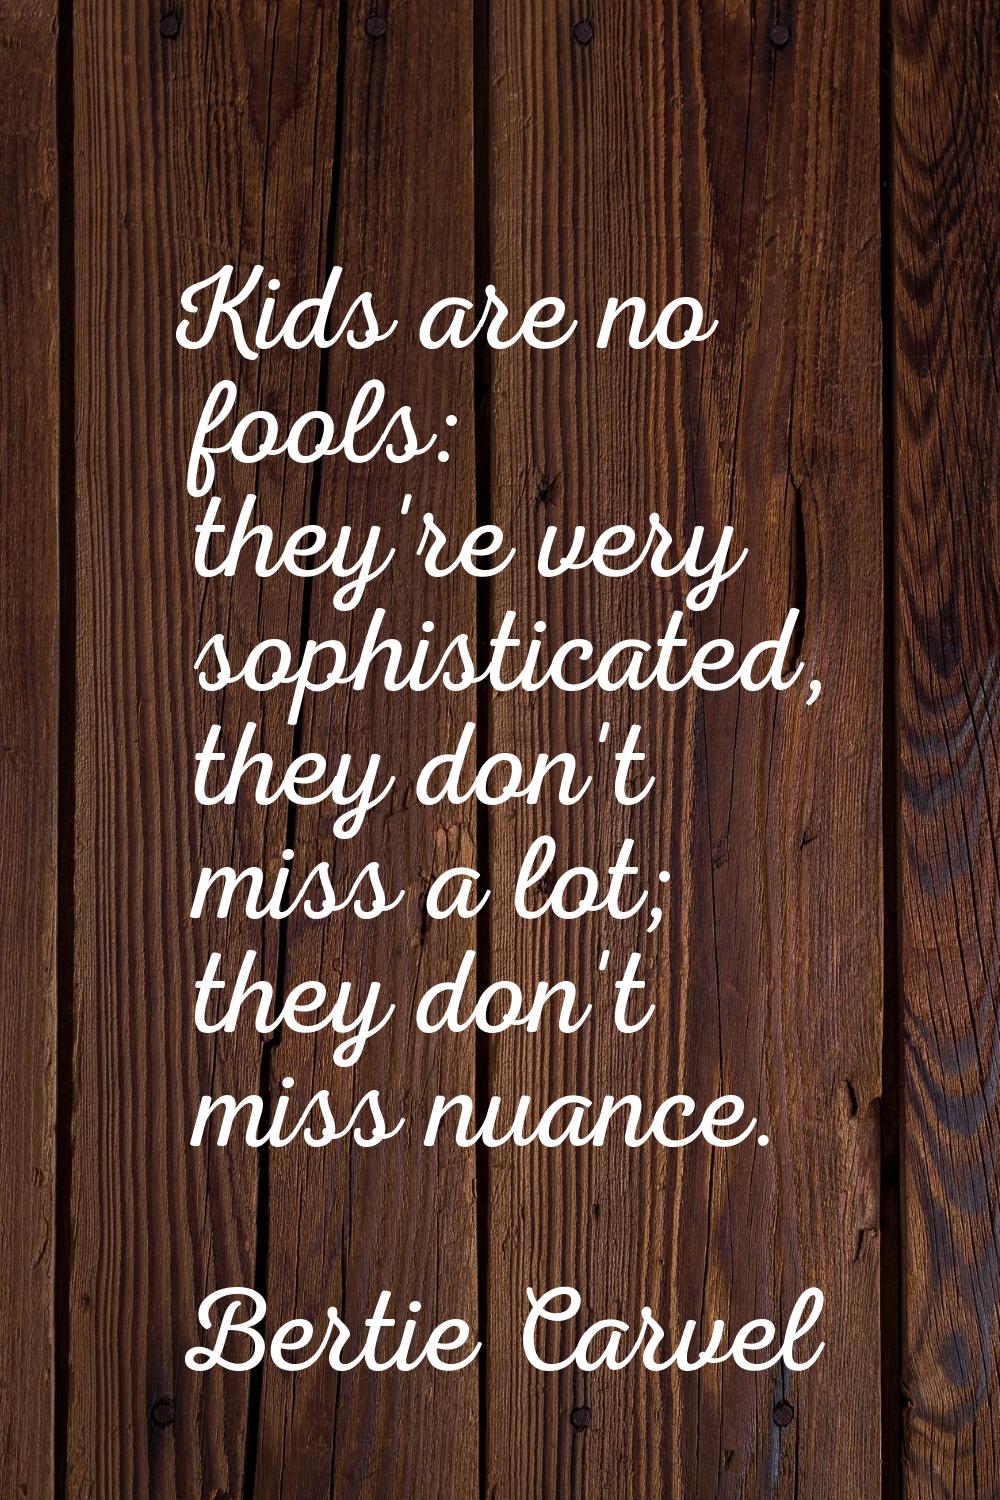 Kids are no fools: they're very sophisticated, they don't miss a lot; they don't miss nuance.